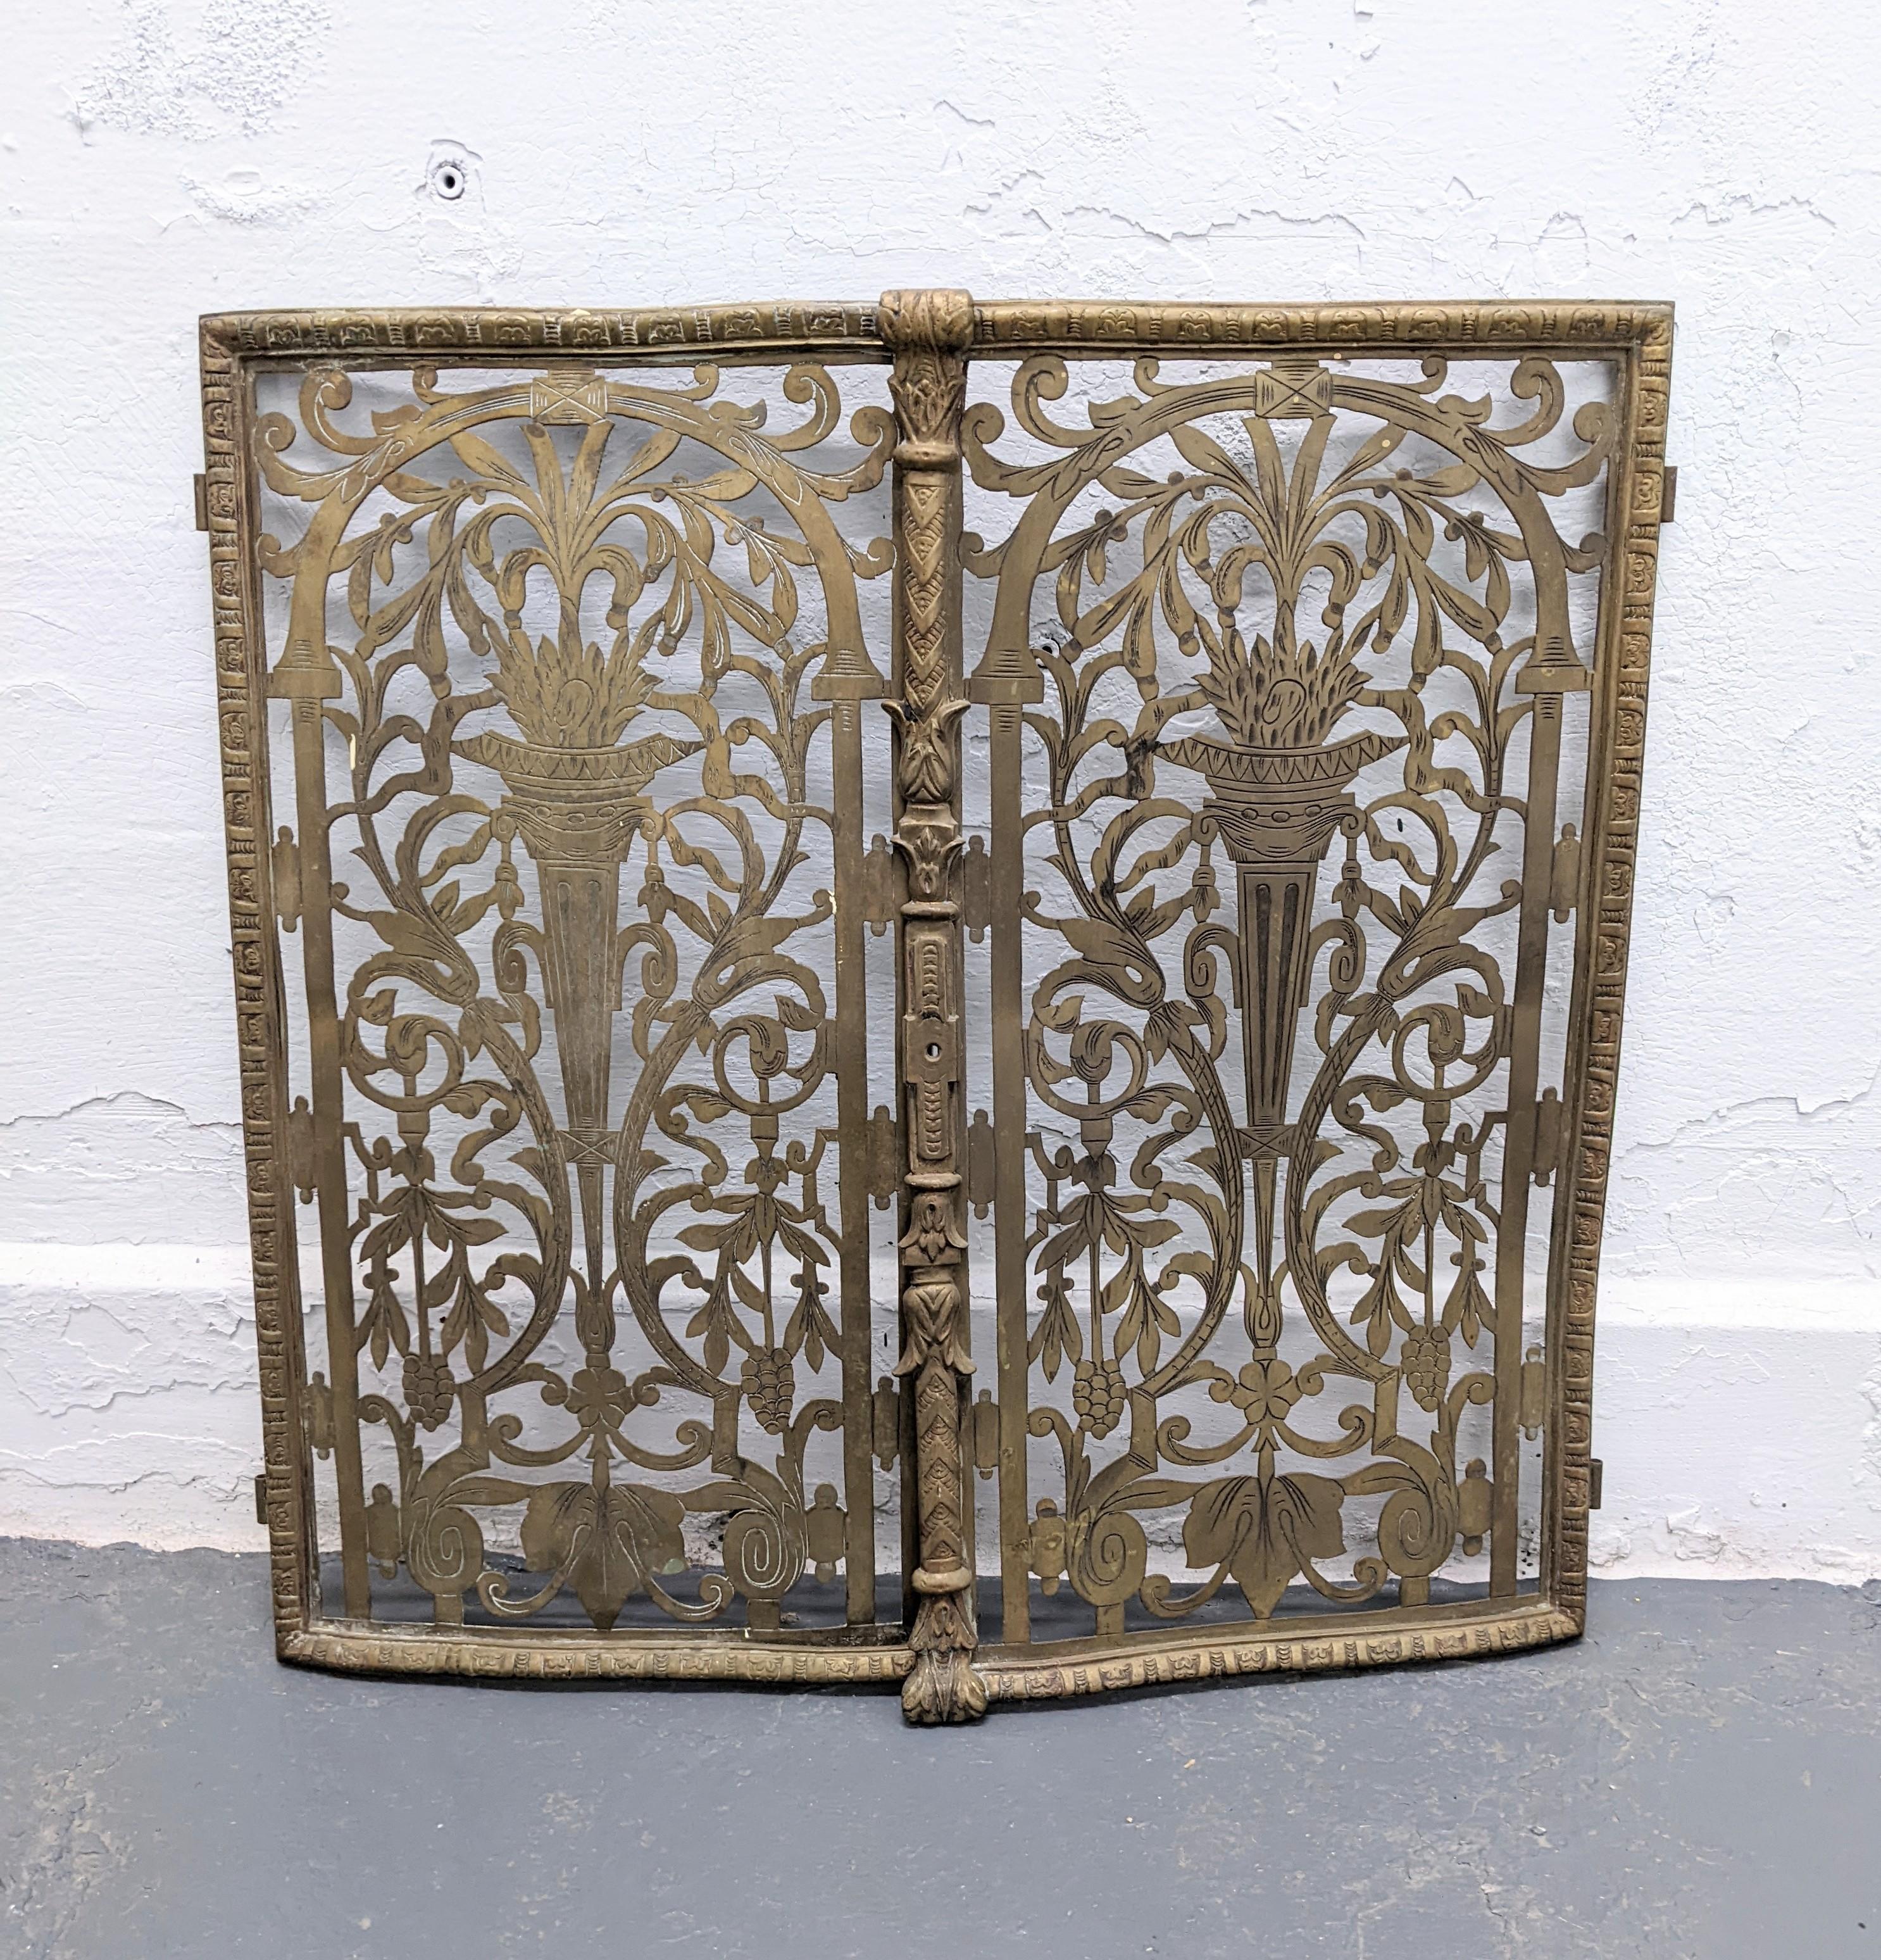 Pair of Victorian Radiator Covers or Doors ready for repurposing. Hand cut and chased with torch designs on each panel from the late 19th Century in heavy gauge brass. Heavy decoration on front panel edge.
one side 24H x 13 wide, the other side 24h